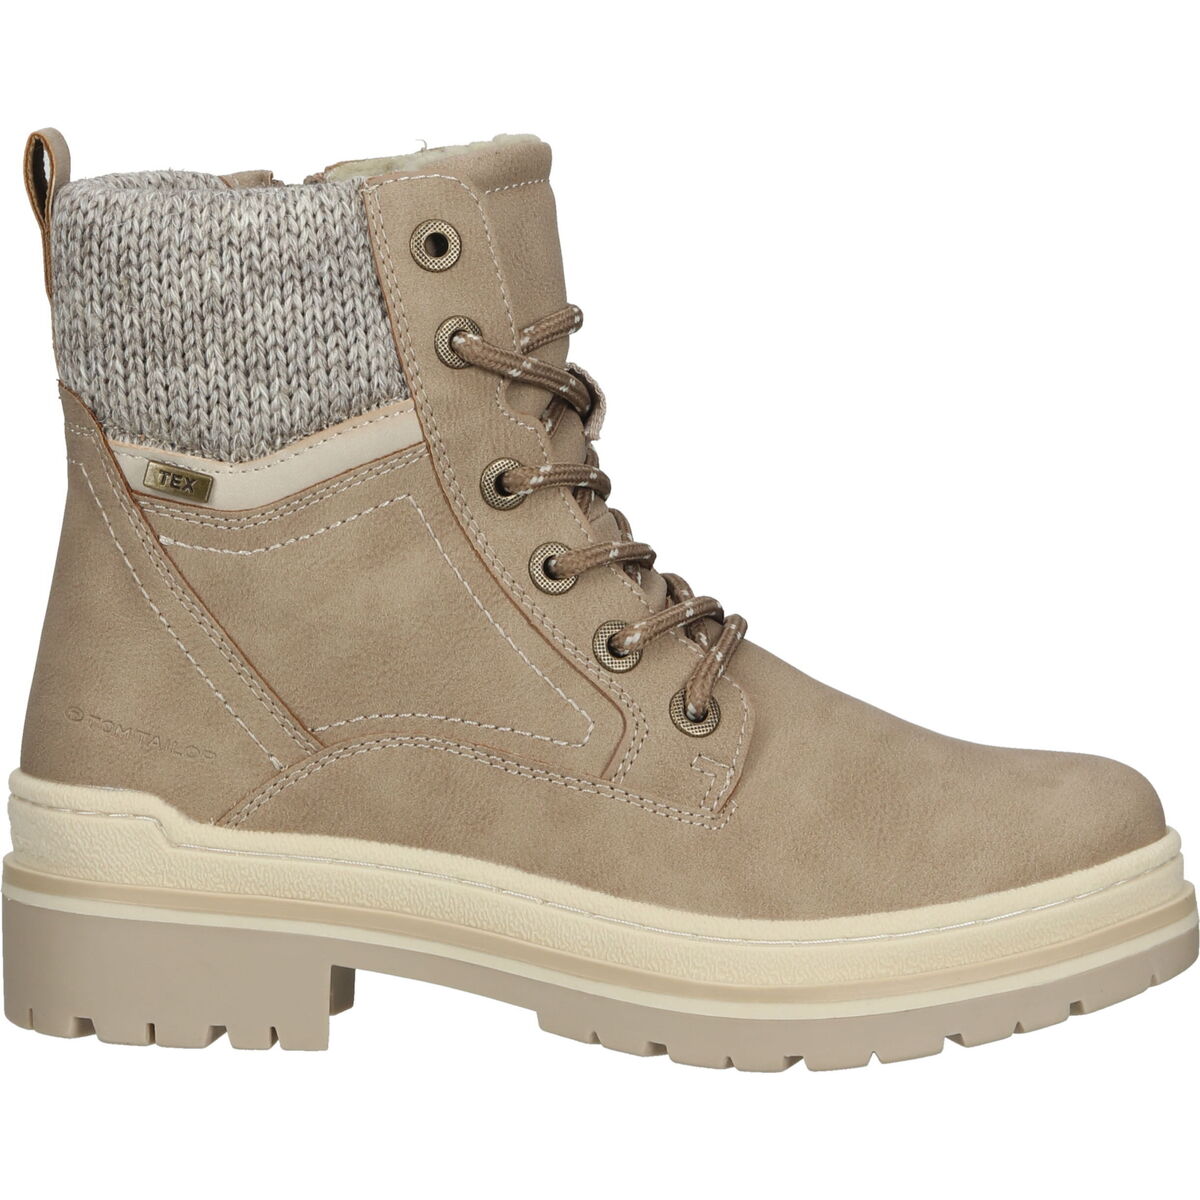 Chaussures Femme Boots Tom Tailor Bottines Beige